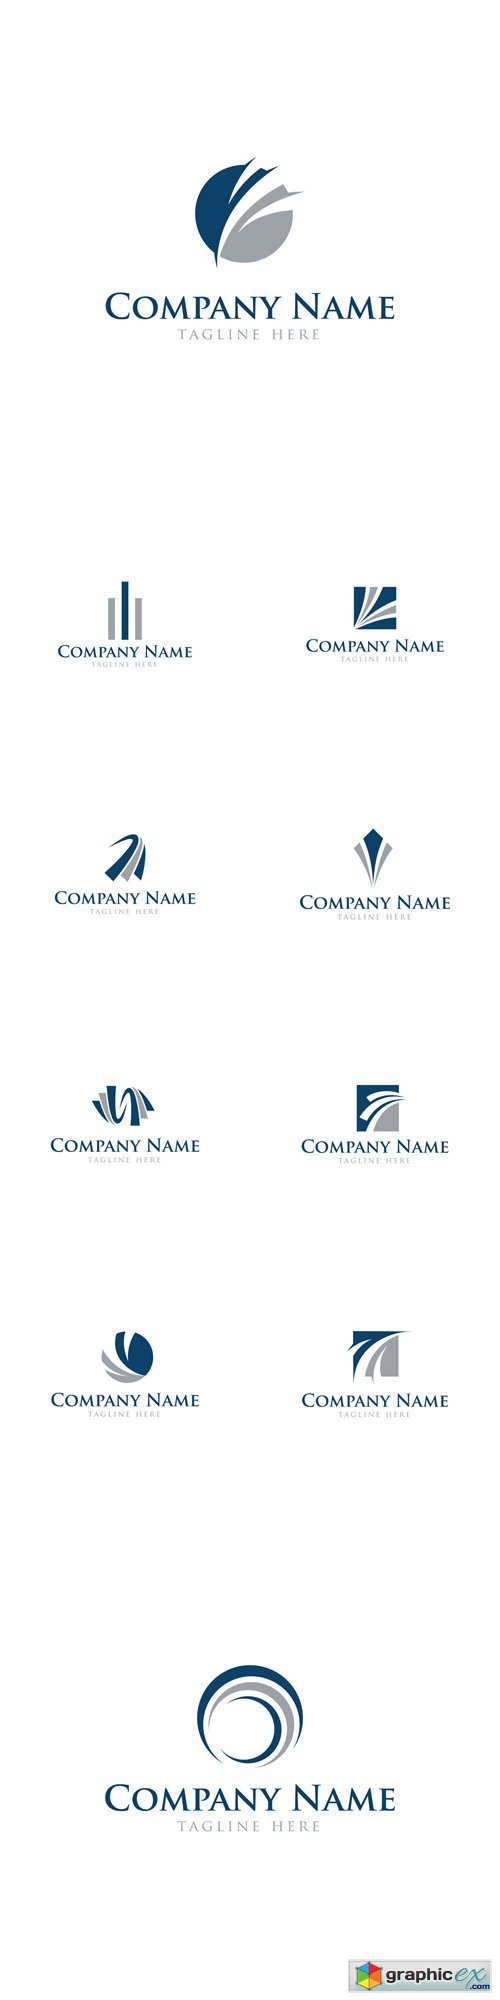 Abstract Business Finance Logos